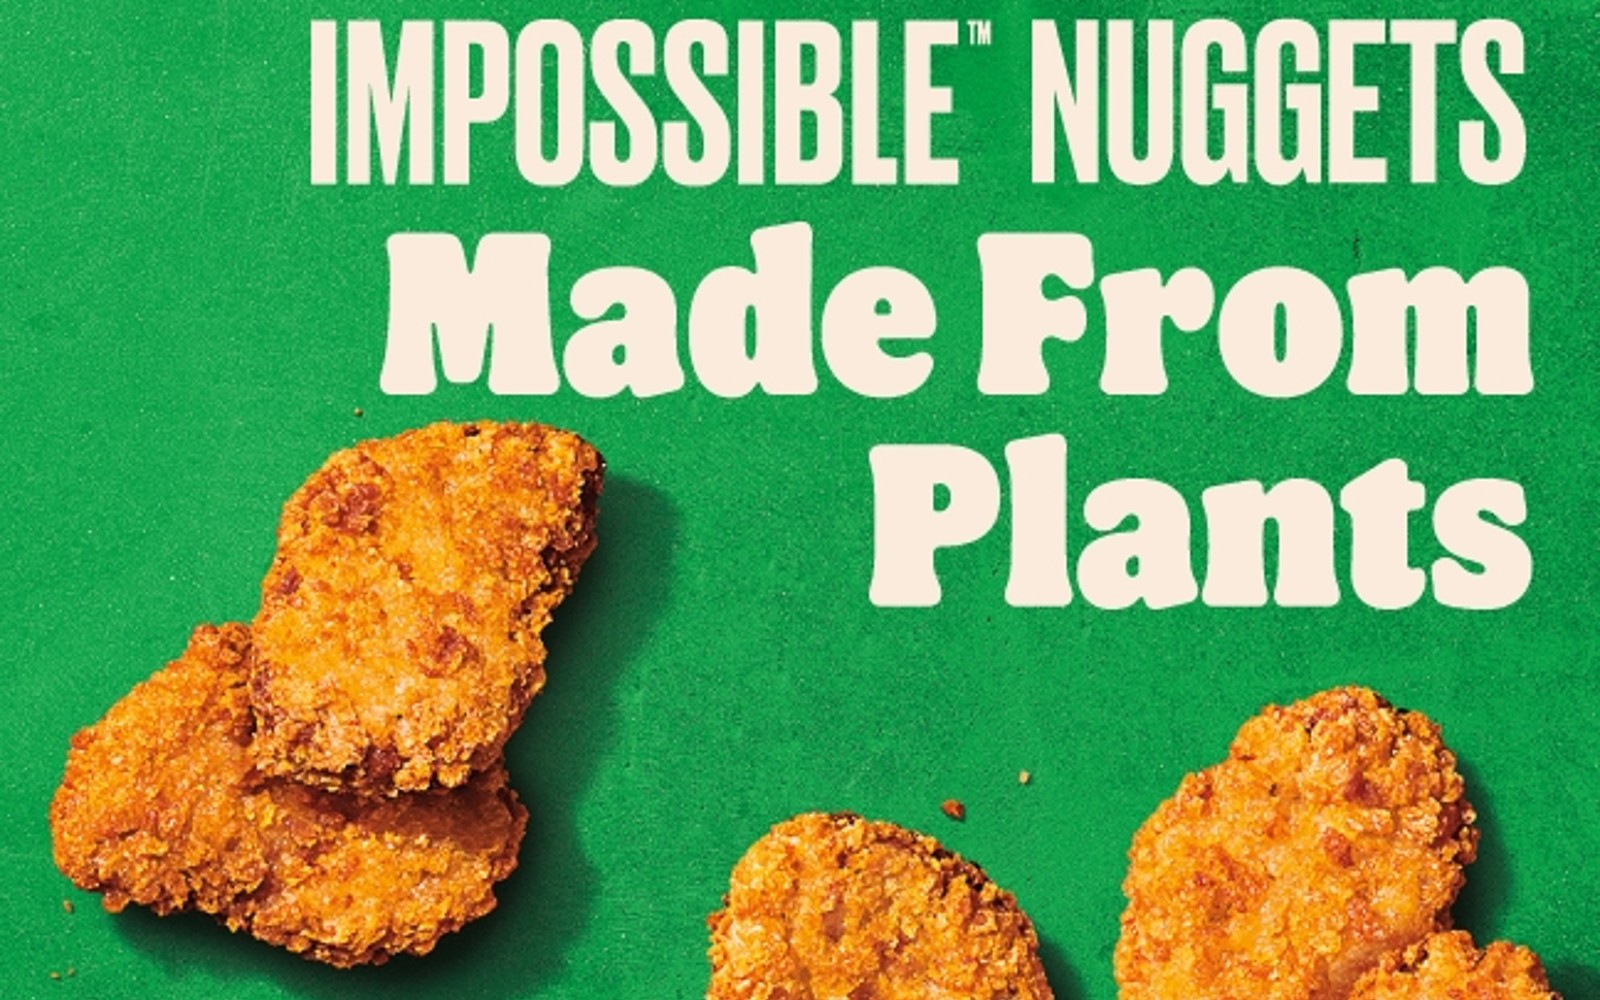 Burger King will promote Very no longer going Nuggets at take hold of locations next week